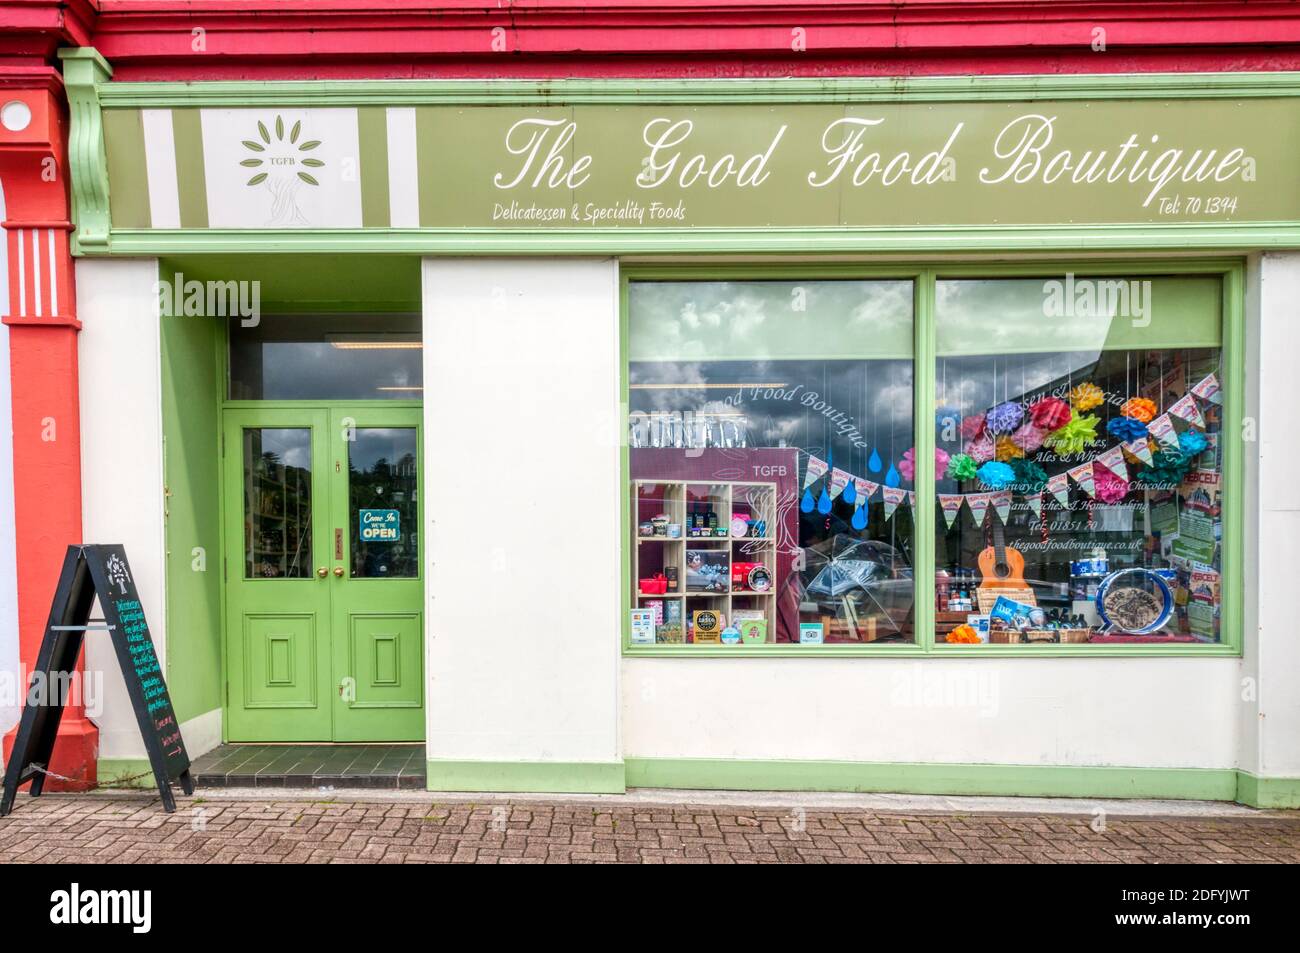 The Good Food Boutique delicatessen in Stornoway on the island of Lewis in the Outer Hebrides. Stock Photo